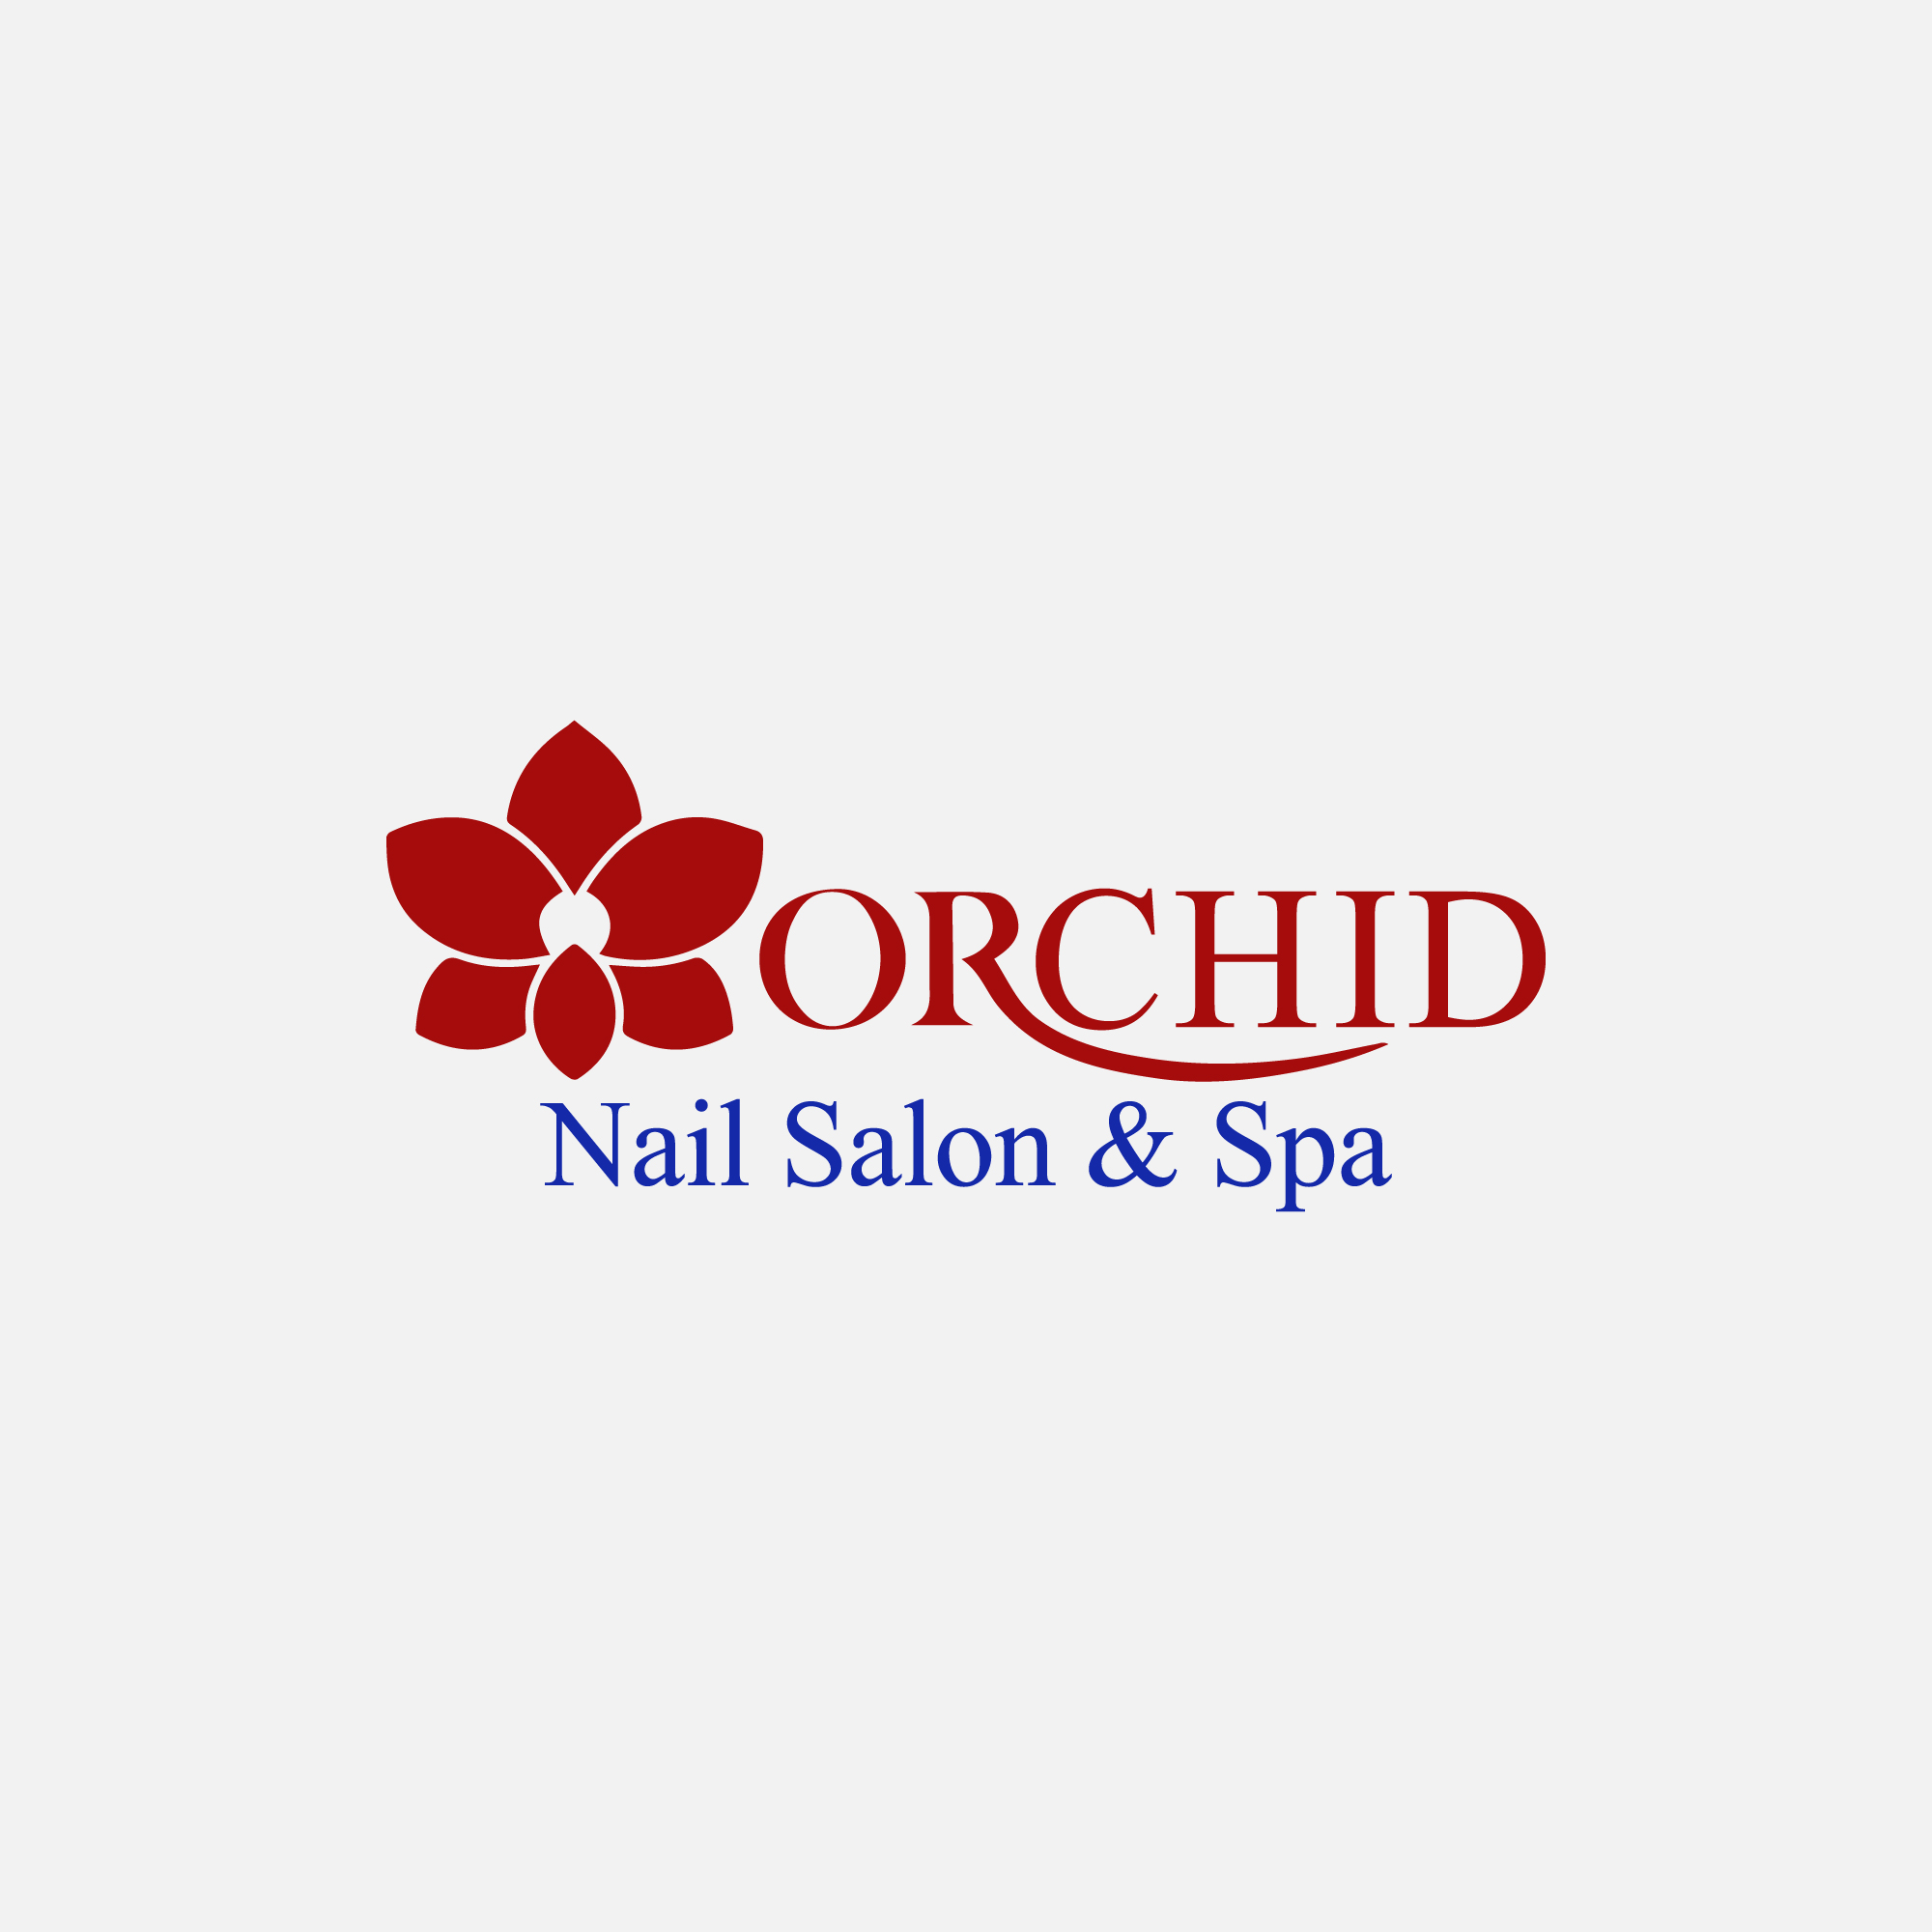 Orchid Nails and Spa (@orchidnailsandspaindy) • Instagram photos and videos